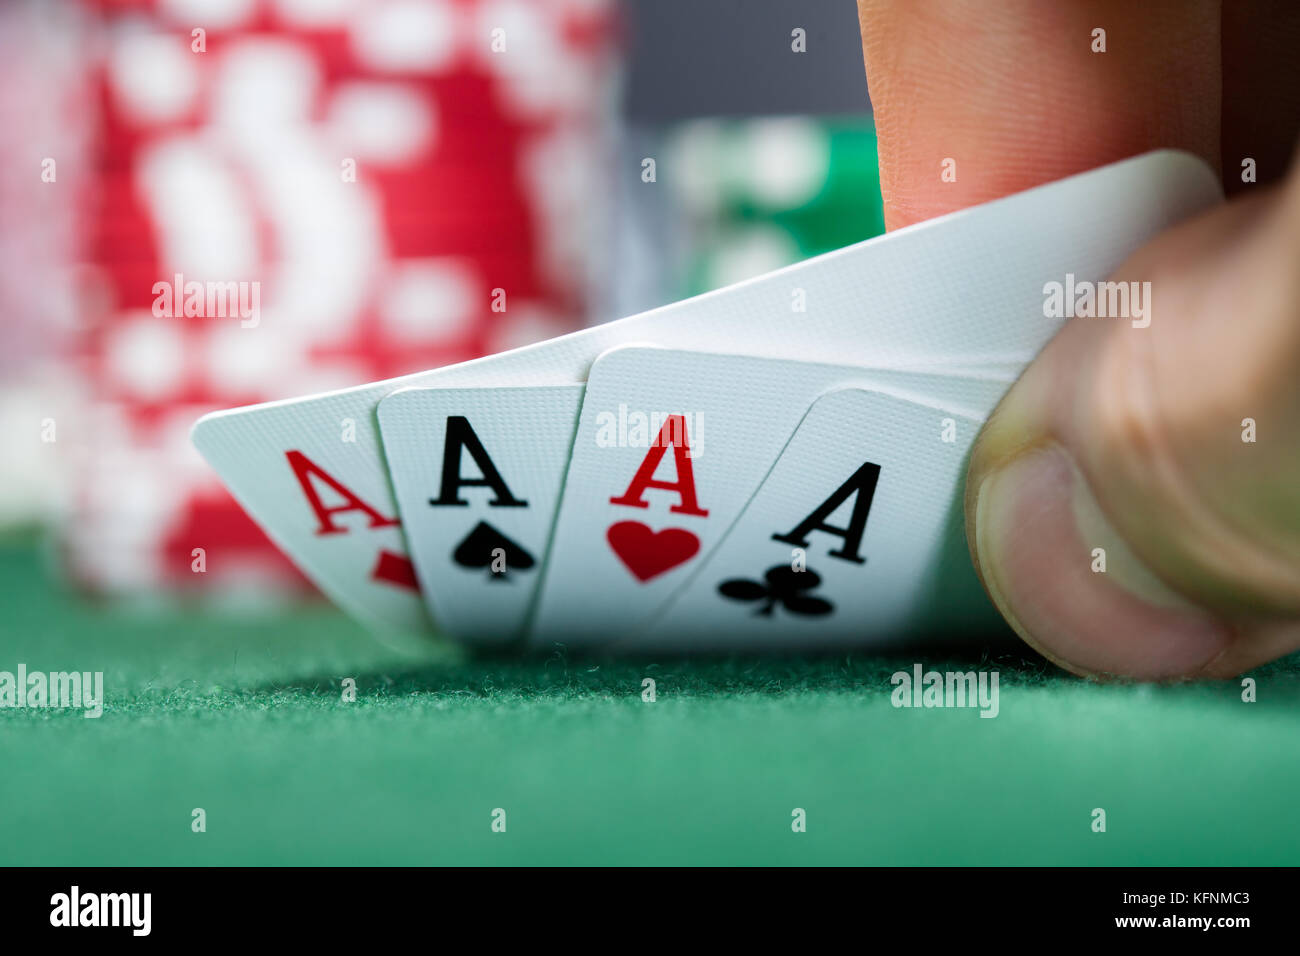 Close-up of a poker player holding playing cards Banque D'Images